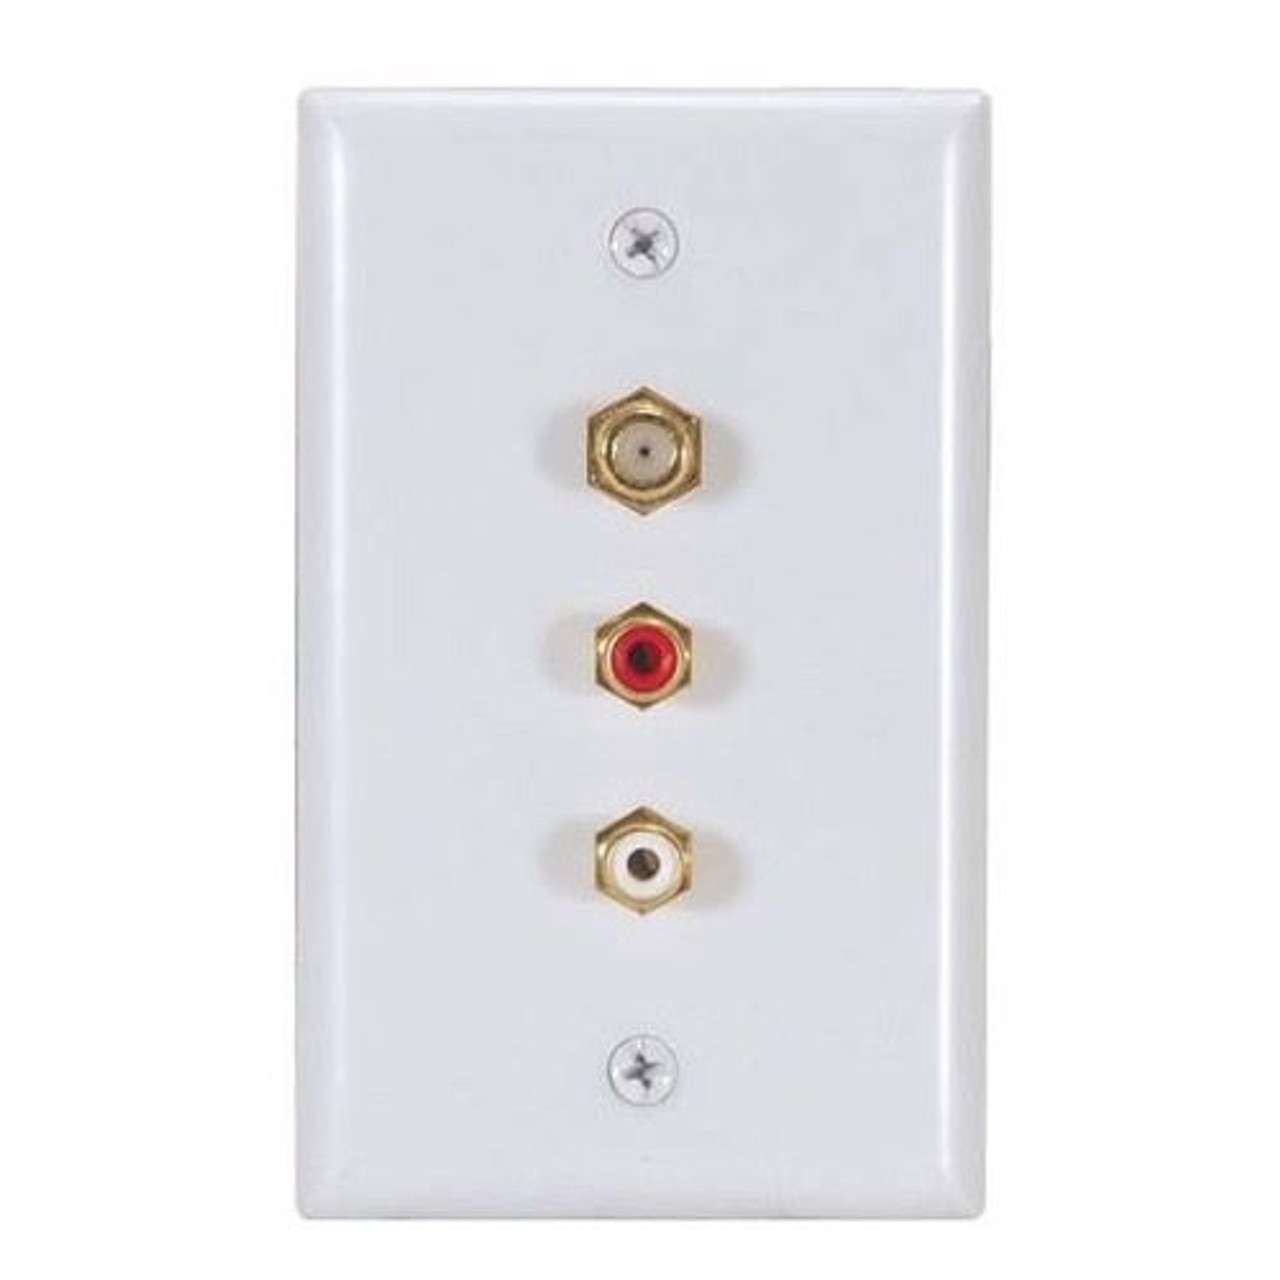 Speaker Wall Plate Dual 2 RCA Female Jack and F-Connector F-81 White Gold Combo Speaker Stereo AV Plug Connect Philips PH62075 Flush Mount Outlet Cover, Part # PH-62075